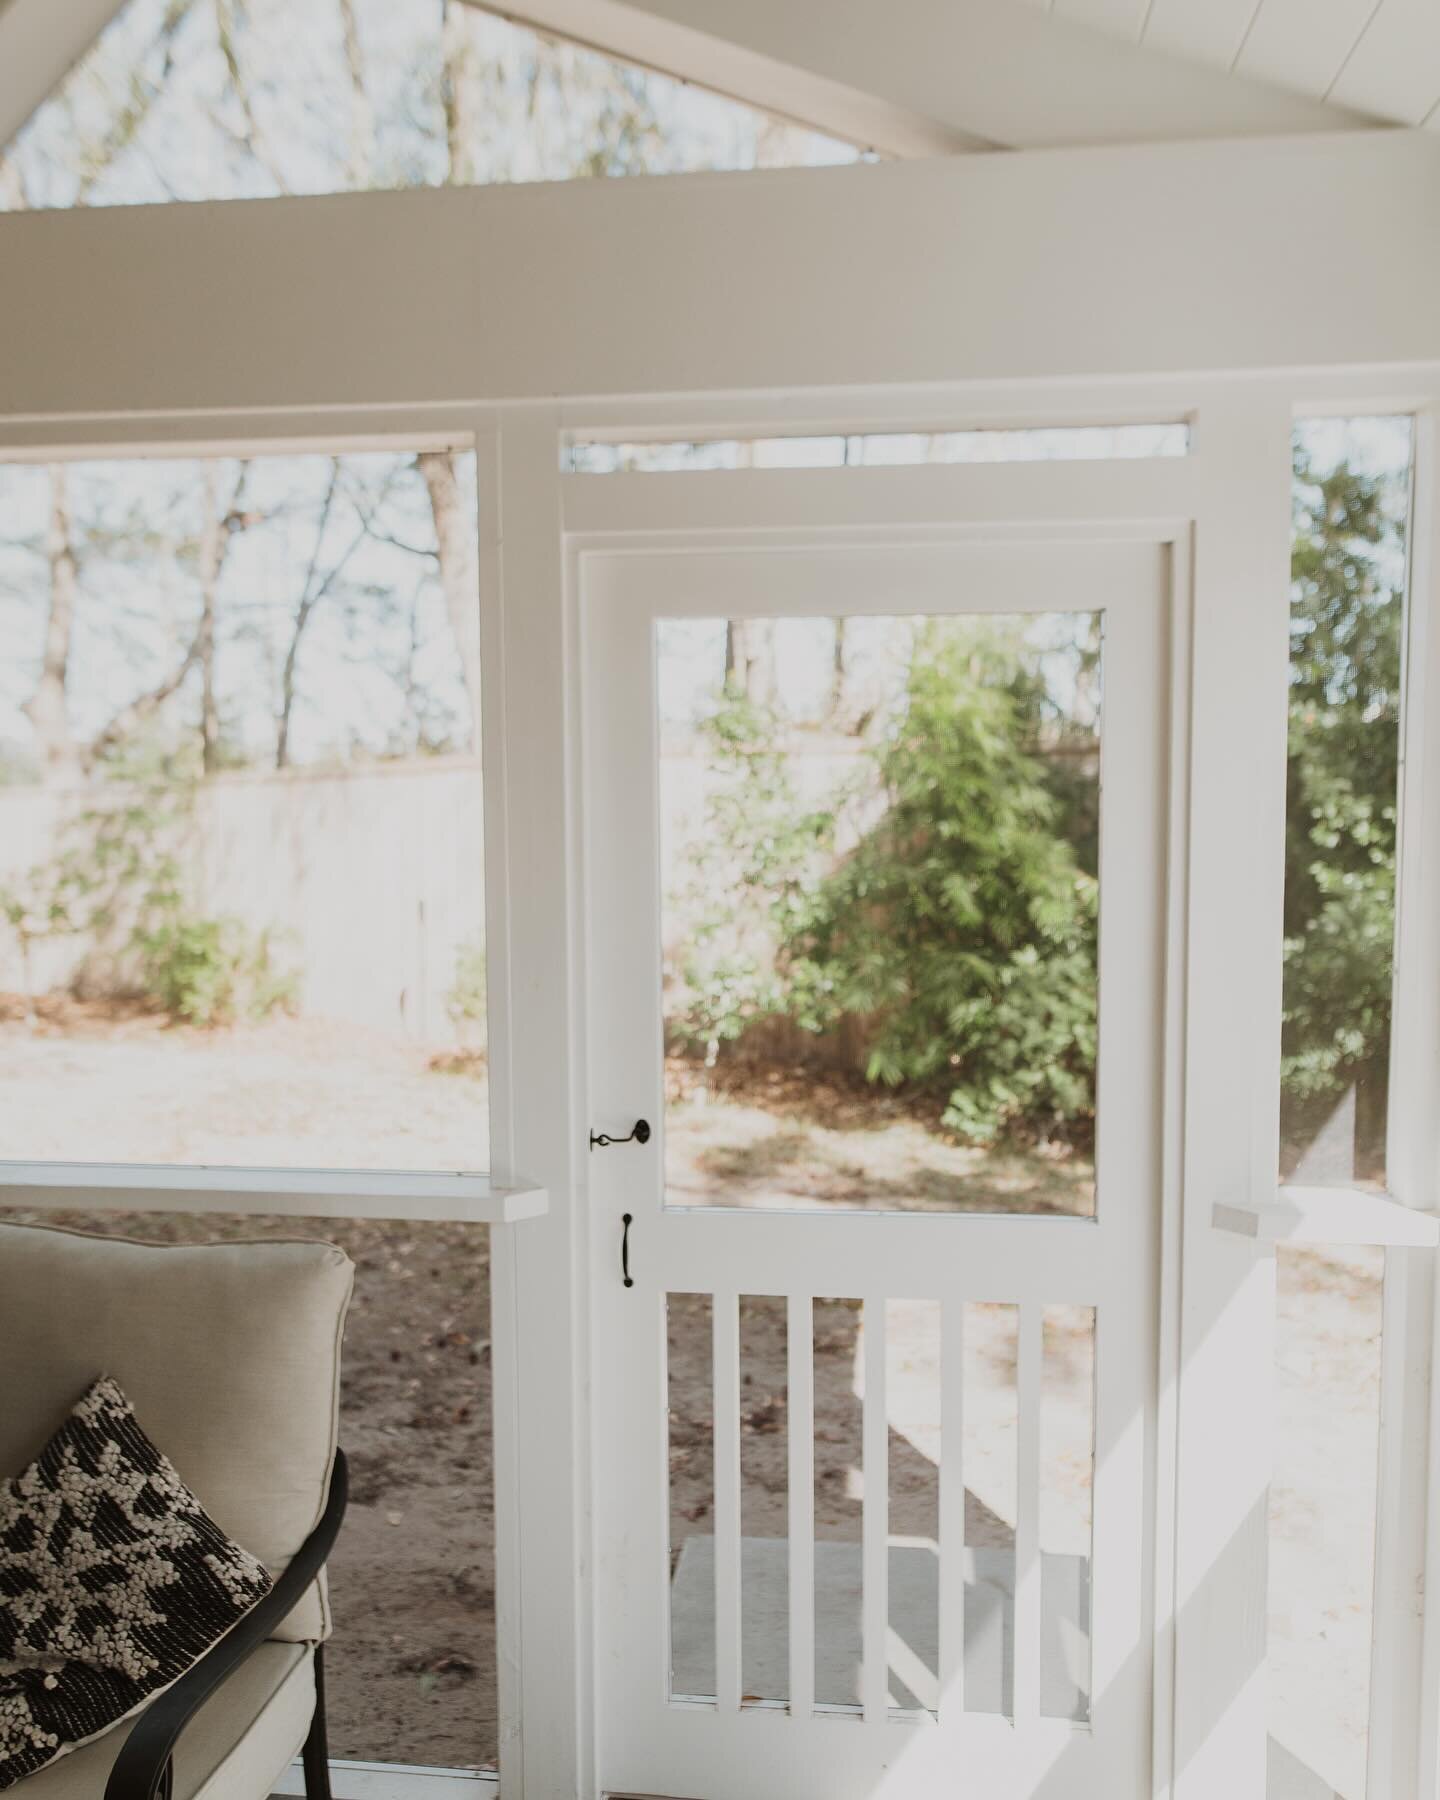 What&rsquo;s that saying &ldquo;When one door closes, another one opens&rdquo;&hellip; ? In this case, your door closes you into your new custom screened porch 😎
📸 @jacquelinefugatt